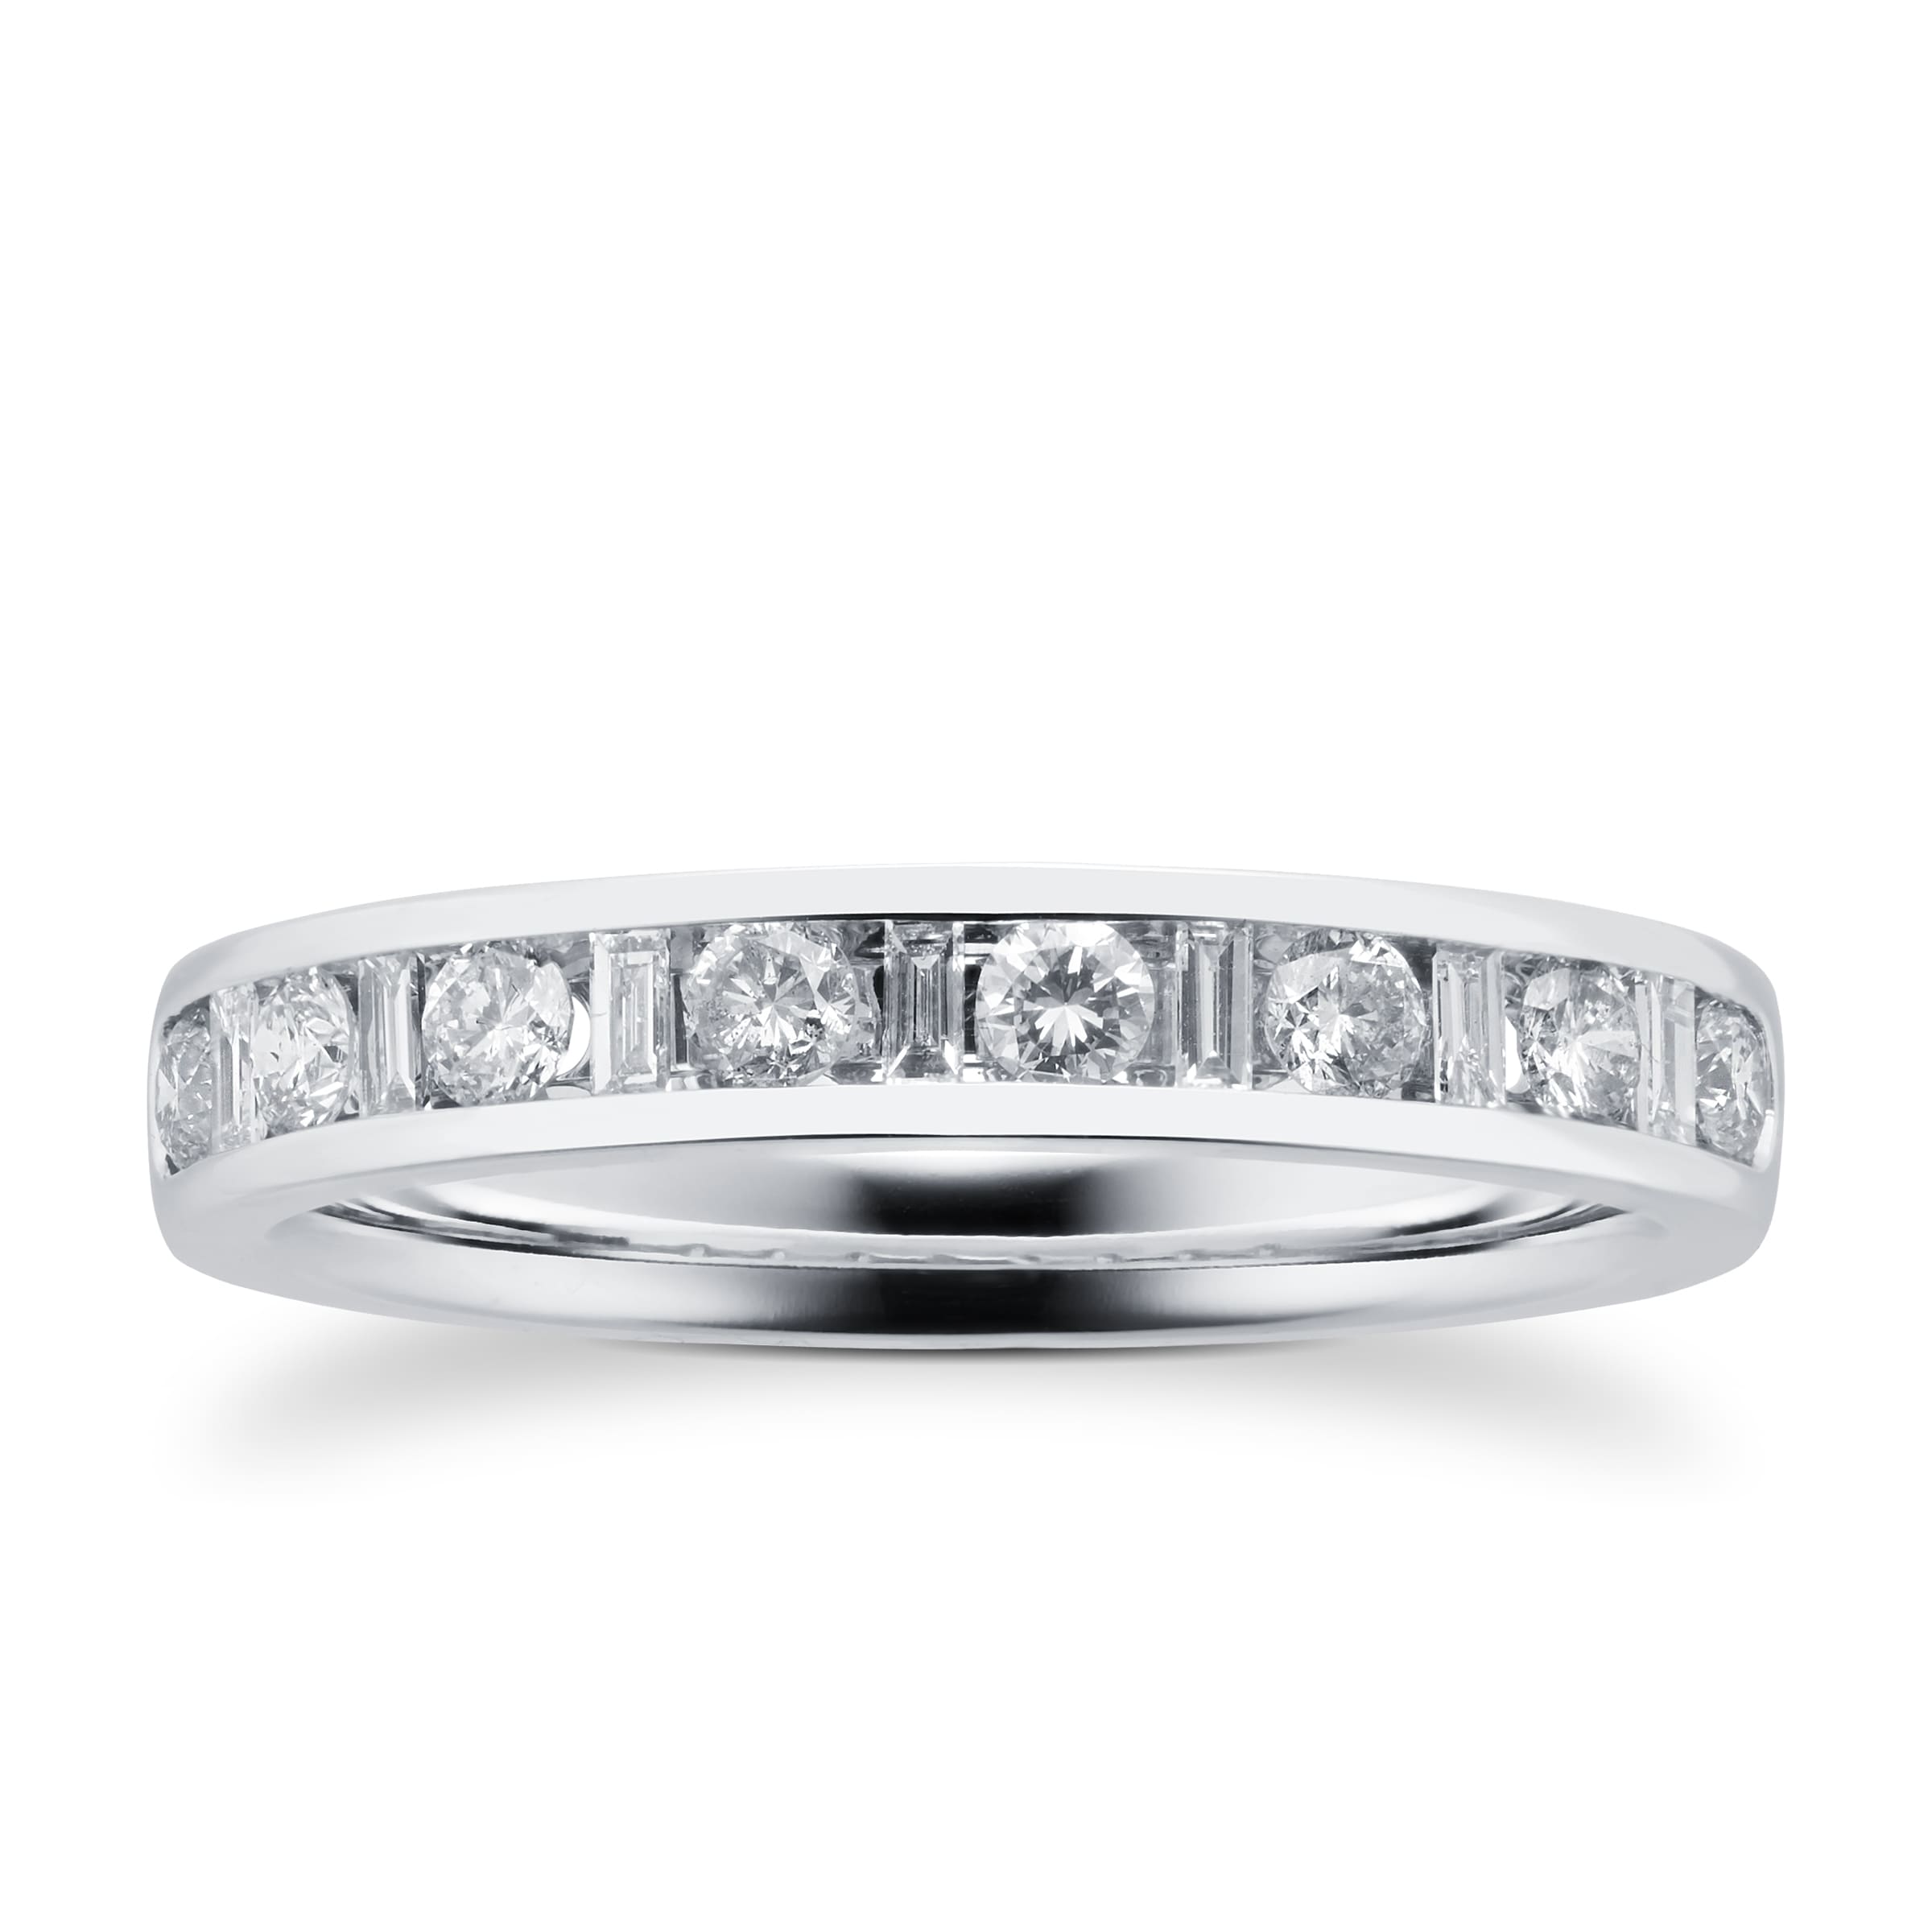 Baguette And Brilliant Cut 050 Carat Total Weight Diamond Half Eternity Ring In 18 Carat White Gold Ring Size L